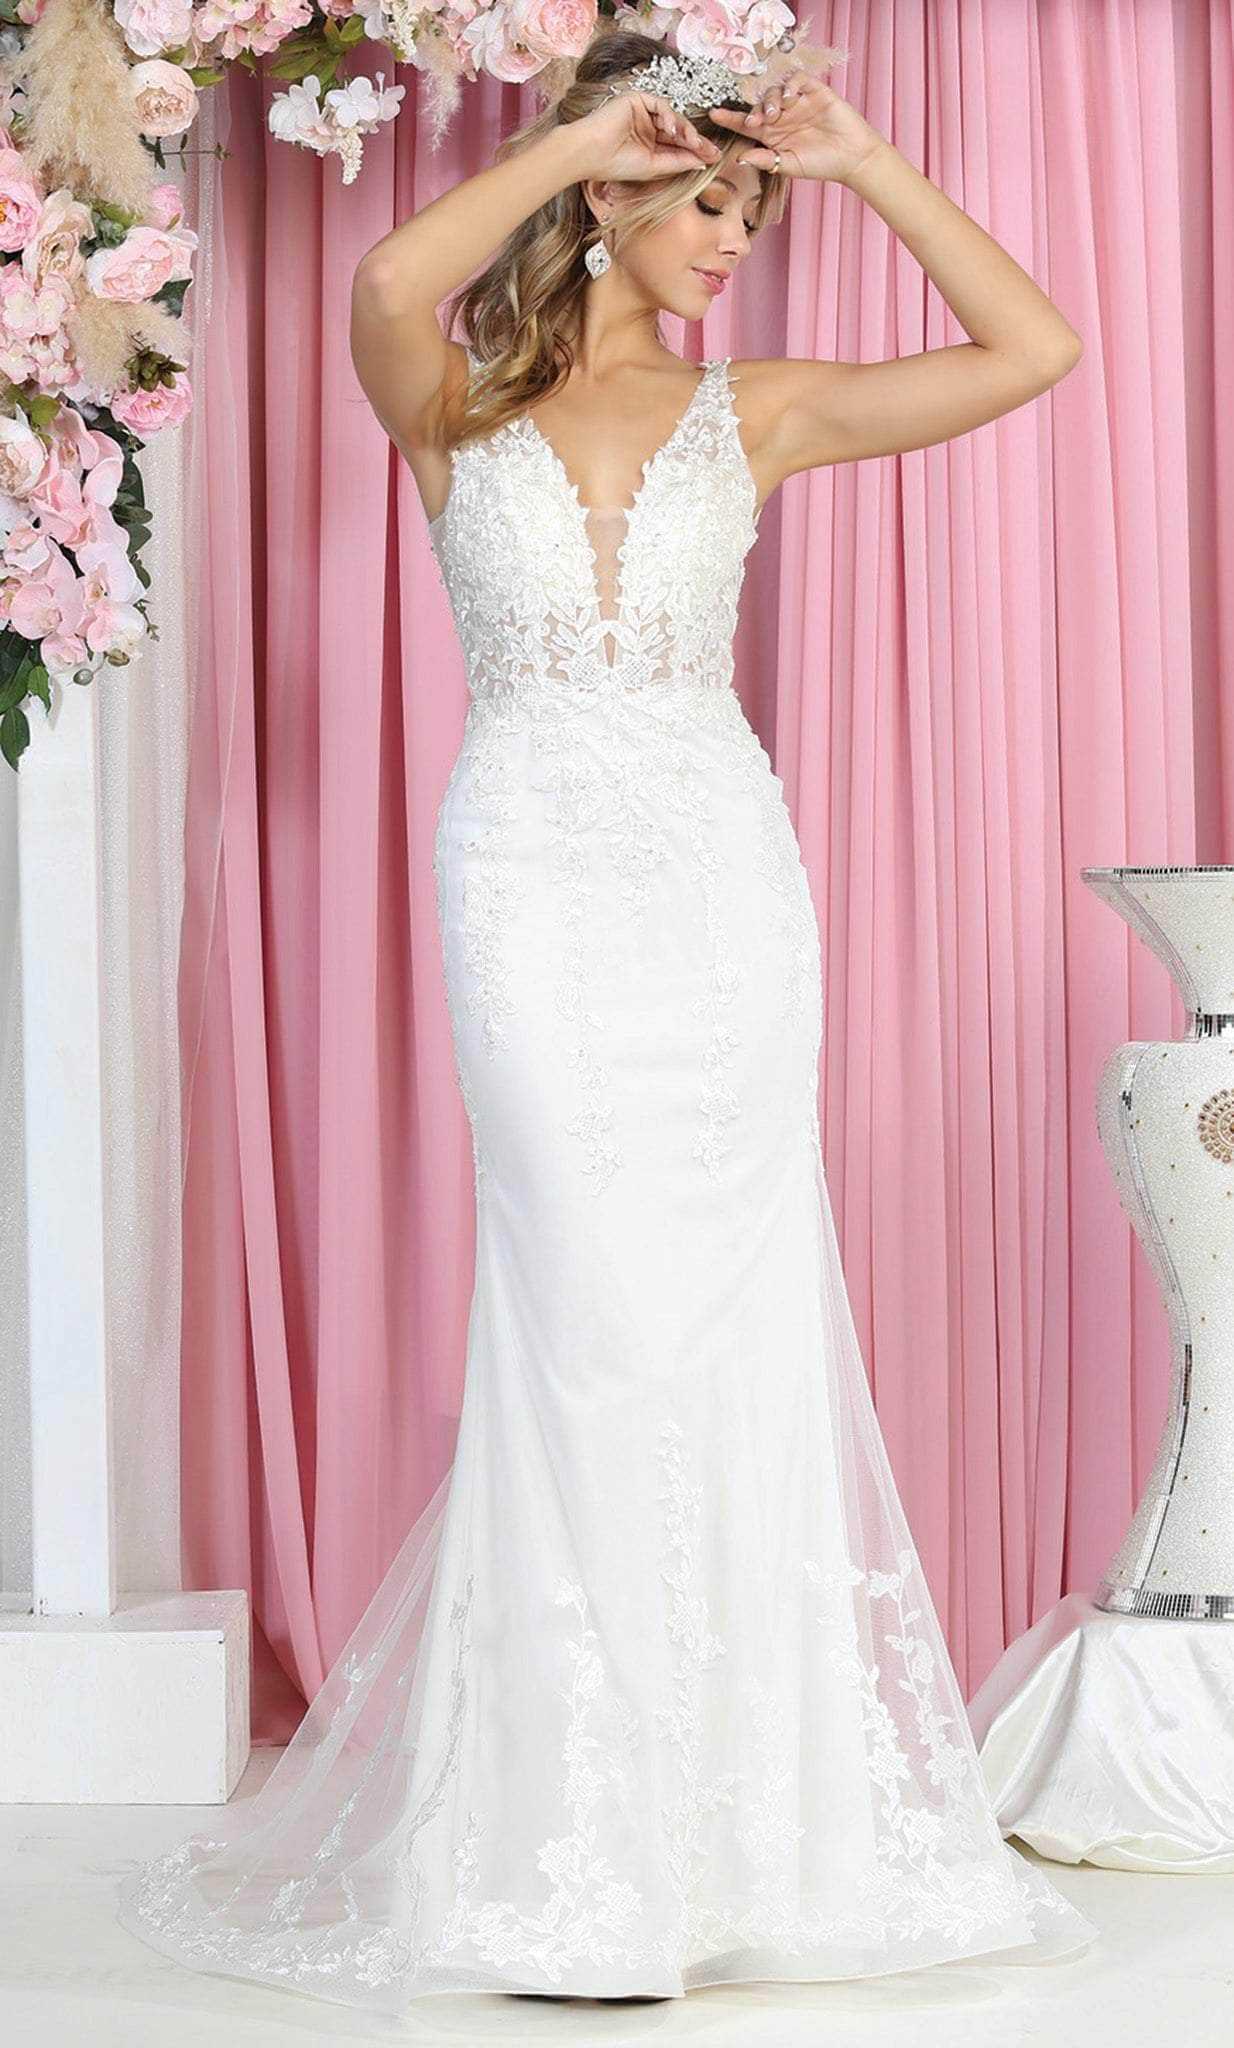 May Queen, May Queen RQ7889 - V Neck and Back Bridal Dress